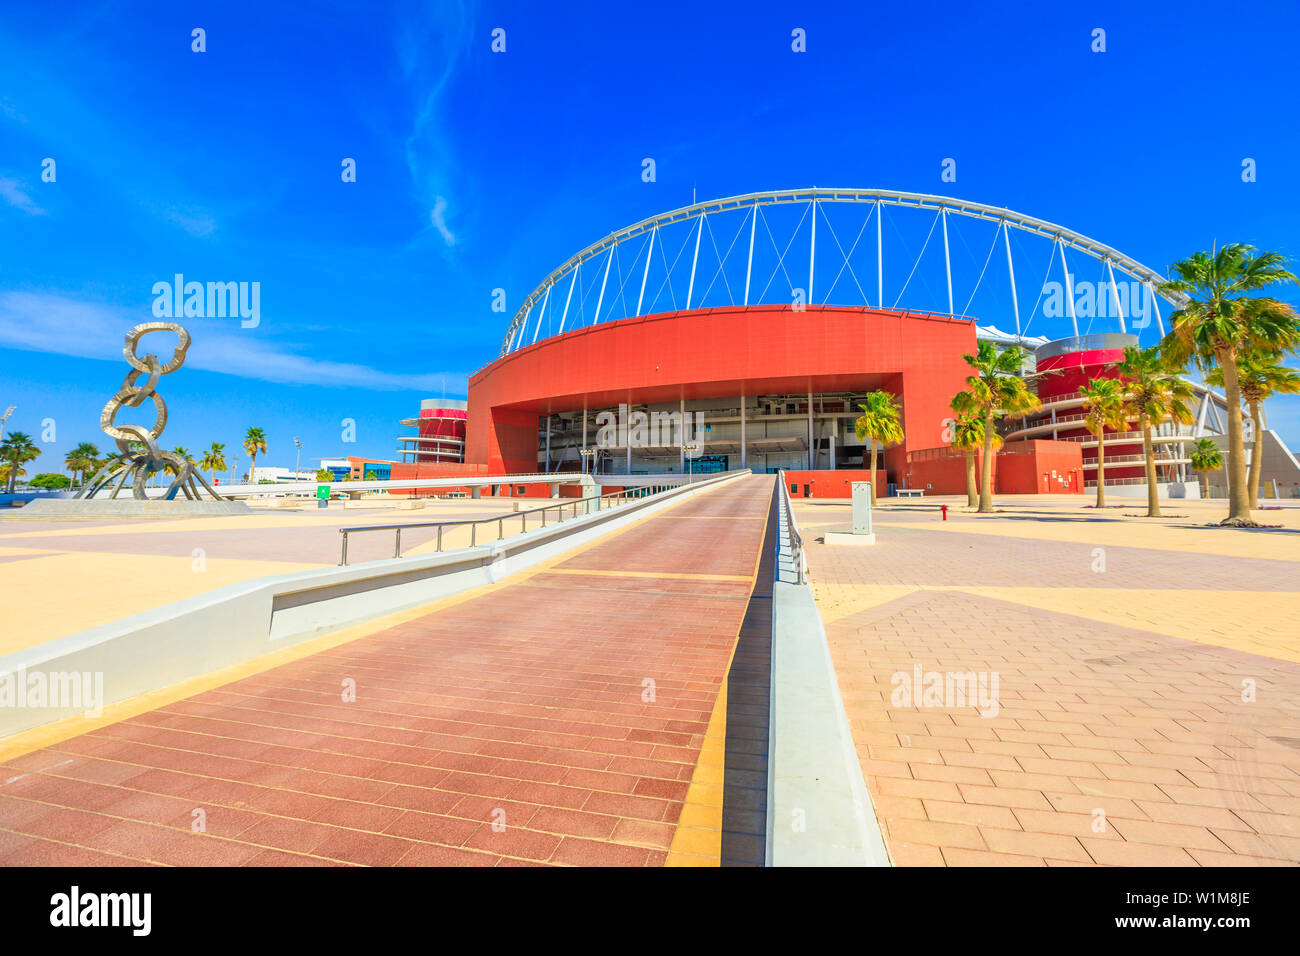 Doha, Qatar - February 21, 2019: entrance of Khalifa National Stadium, completed, renovated, covered with air conditioning, main stadium of Qatar in Stock Photo